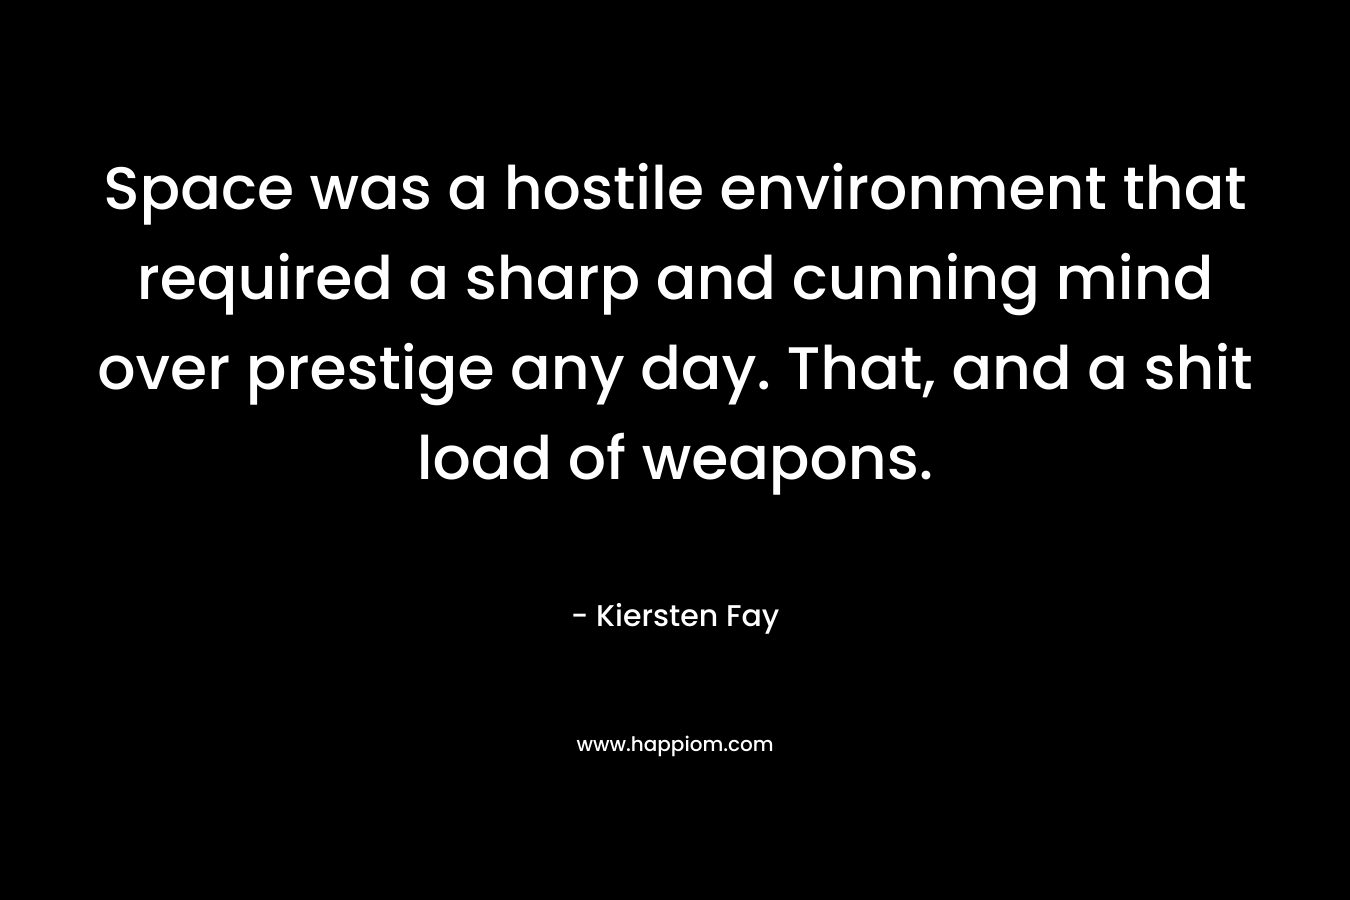 Space was a hostile environment that required a sharp and cunning mind over prestige any day. That, and a shit load of weapons.